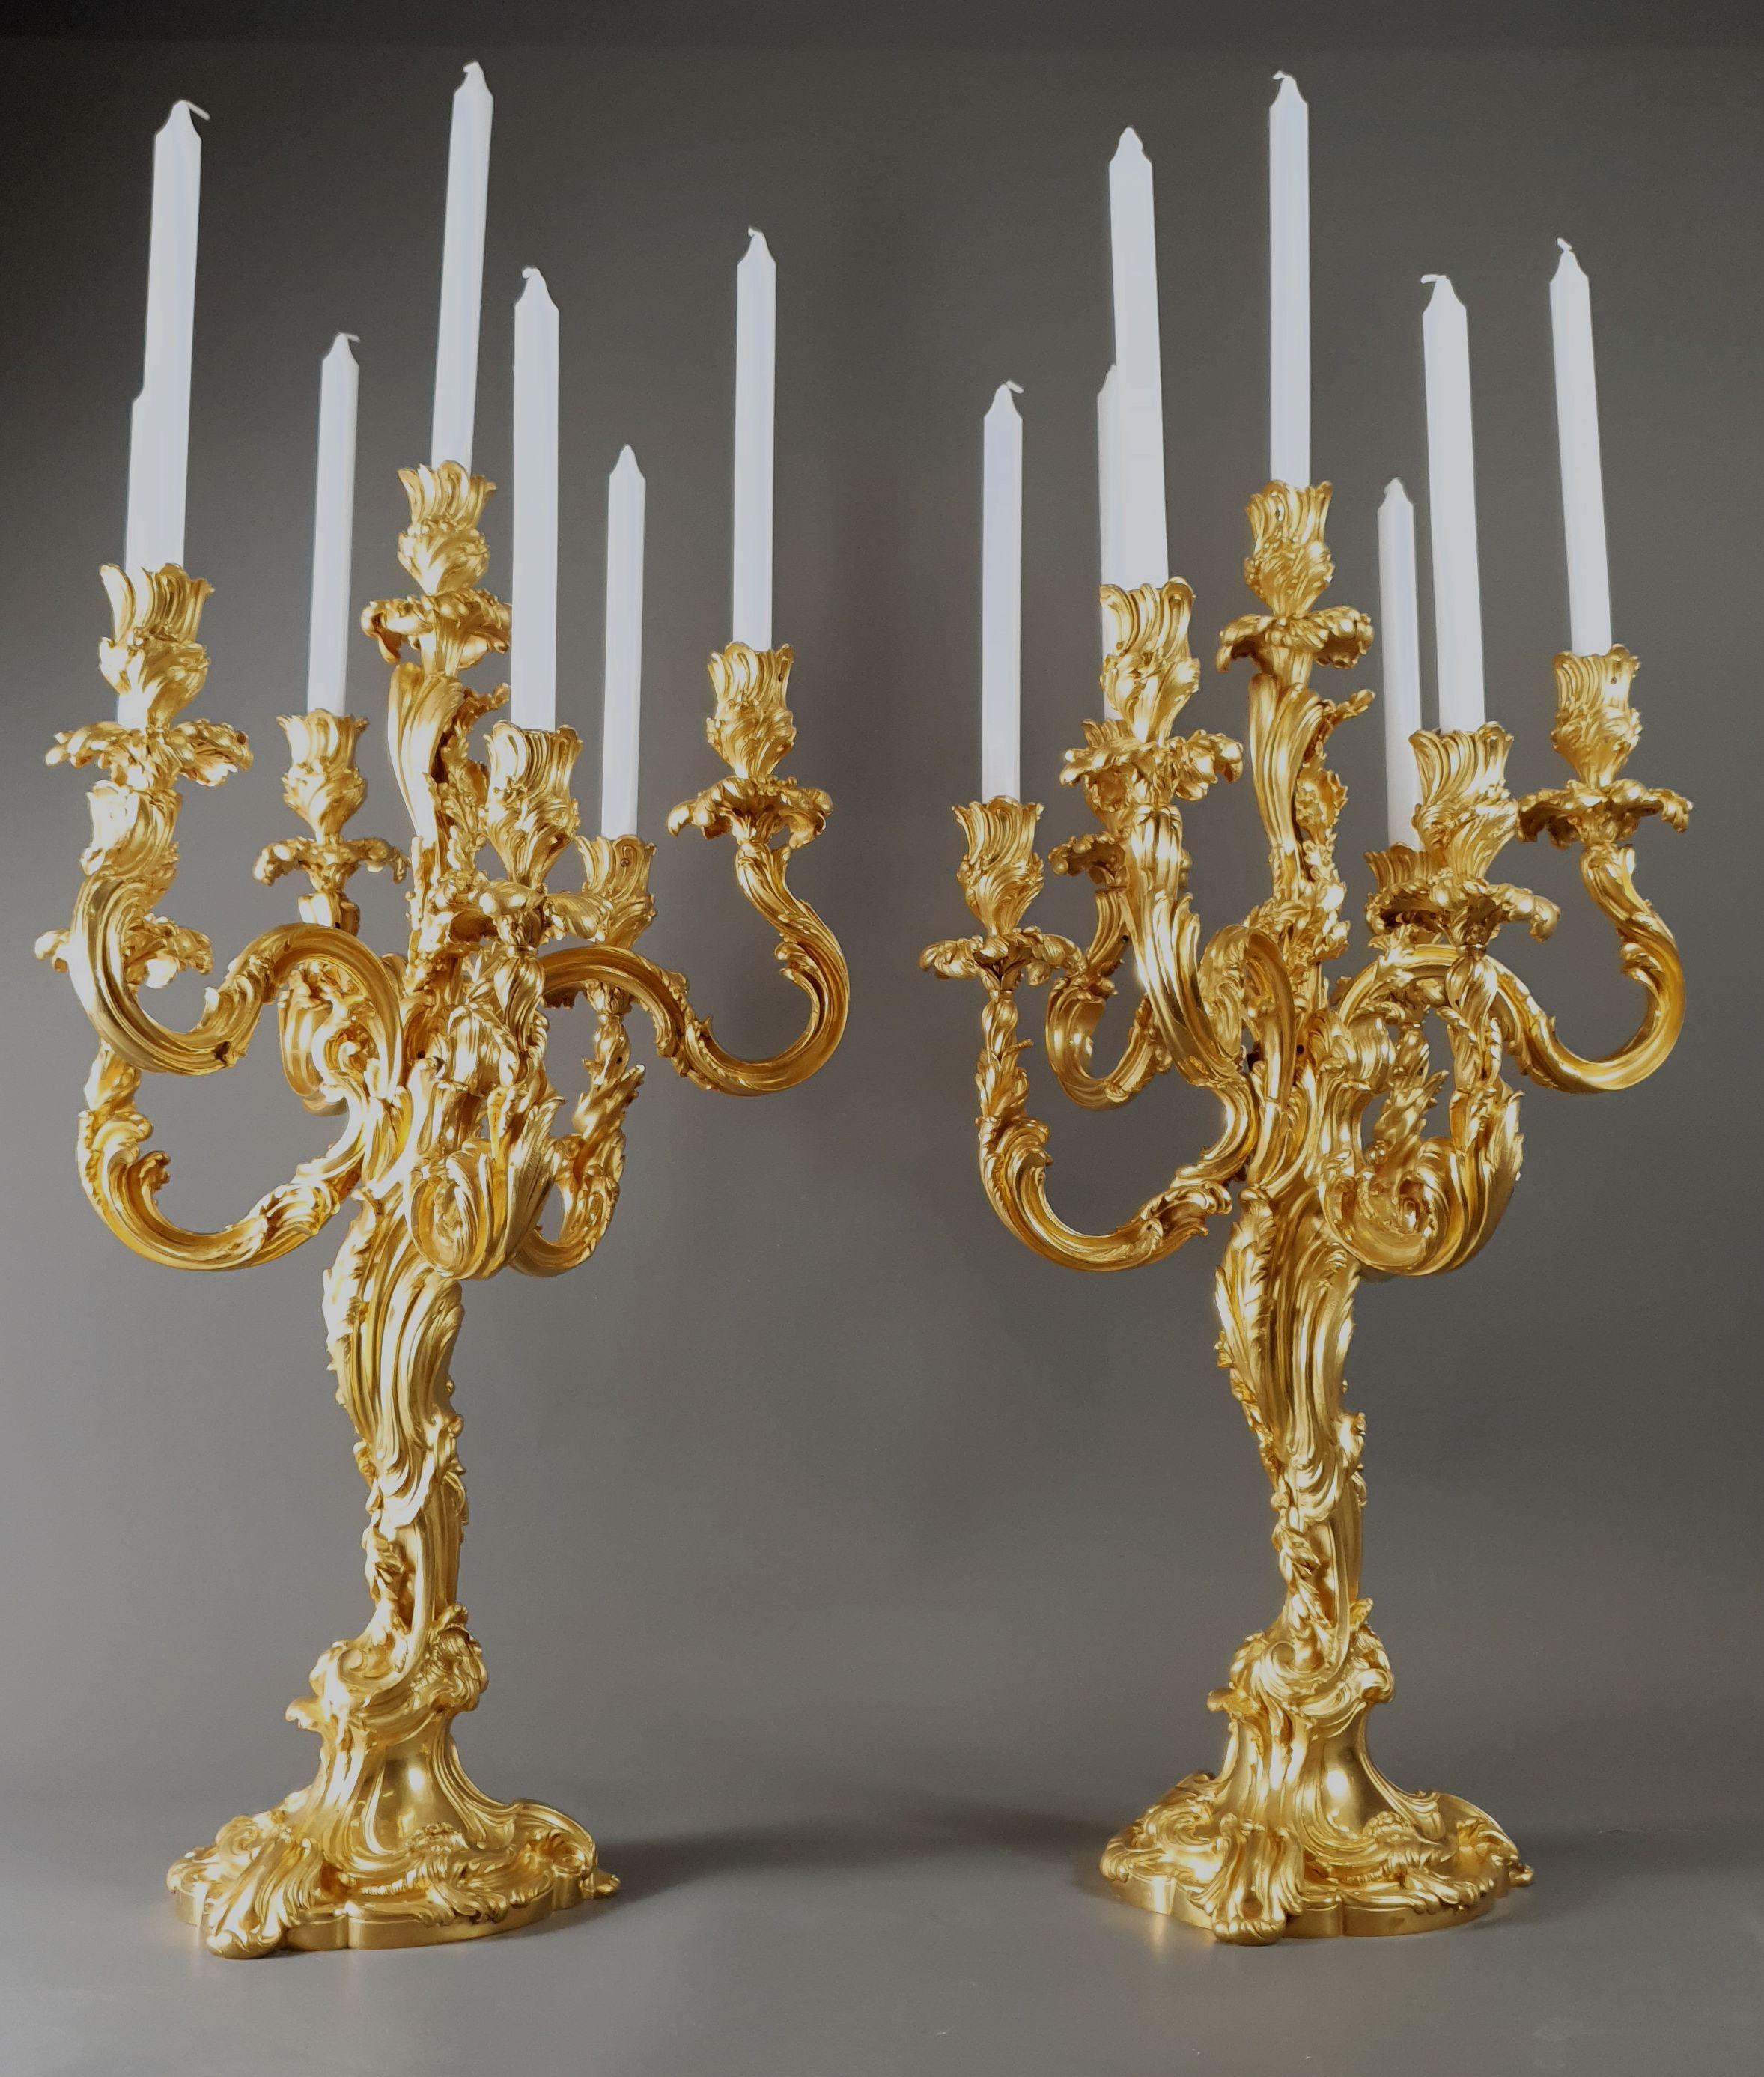 19th Century Important Pair of Louis XV Rocaille Candelabras Stamped Millet in Paris